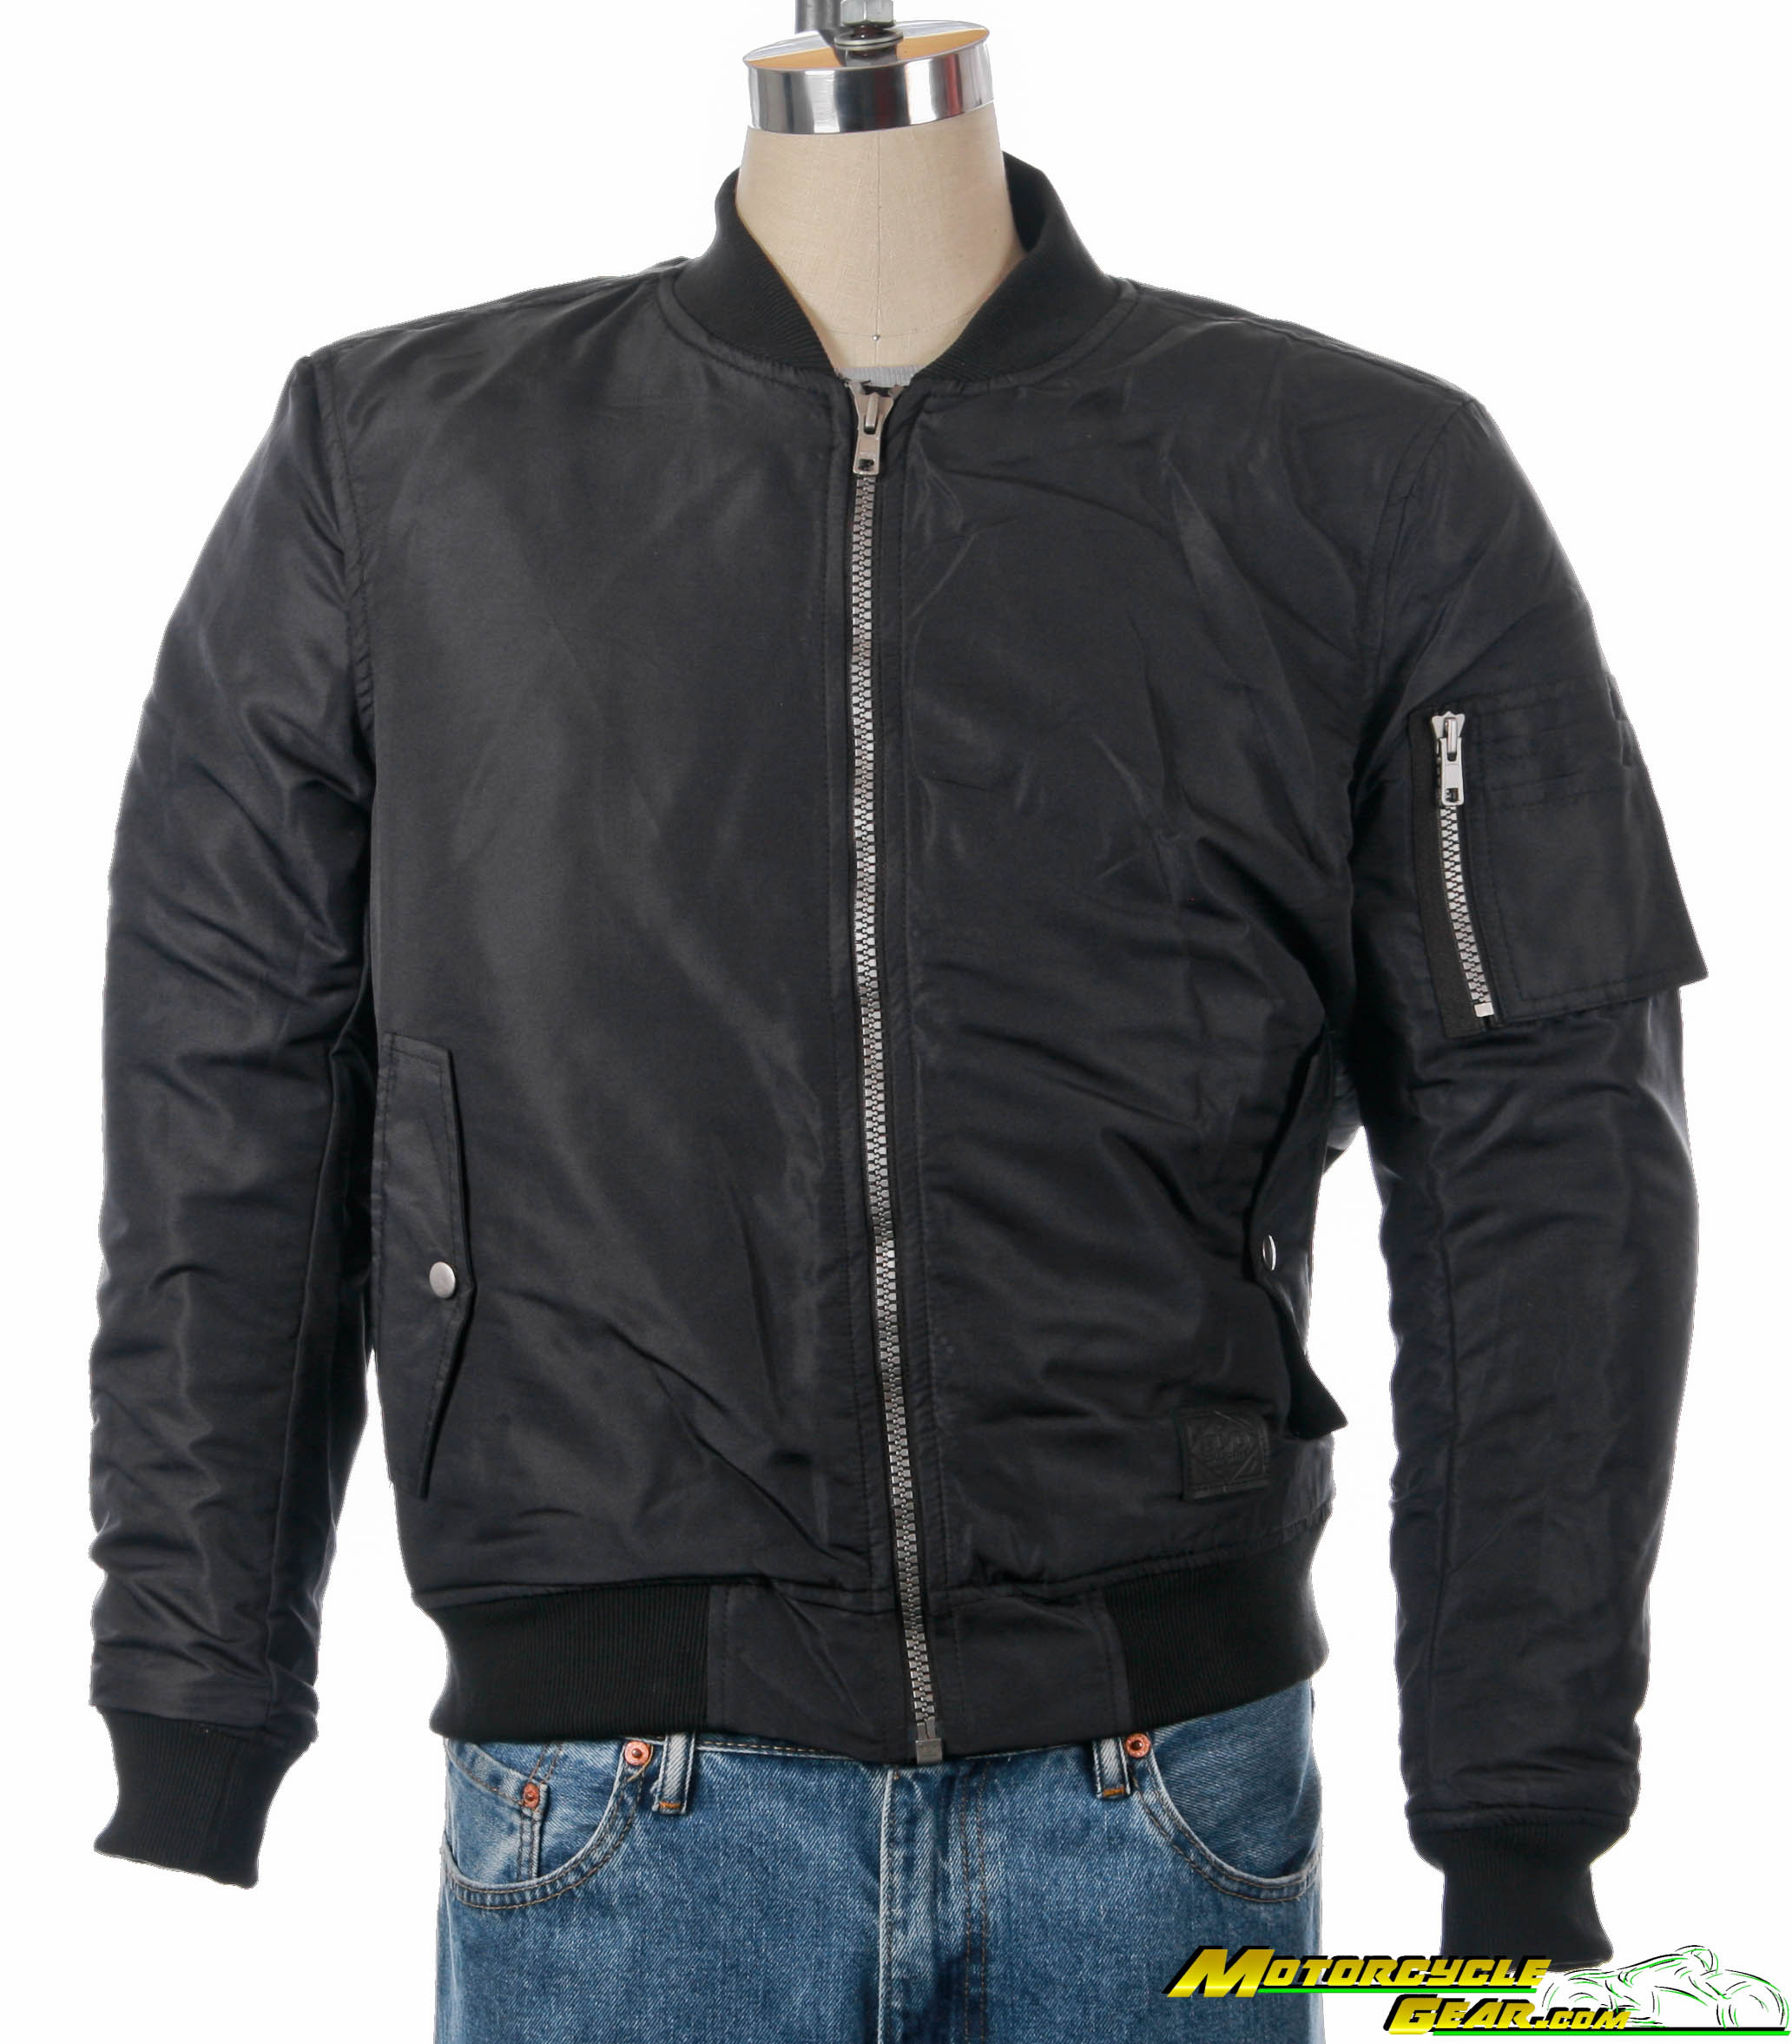 Viewing Images For Cortech The Skipper Bomber Jacket :: MotorcycleGear.com